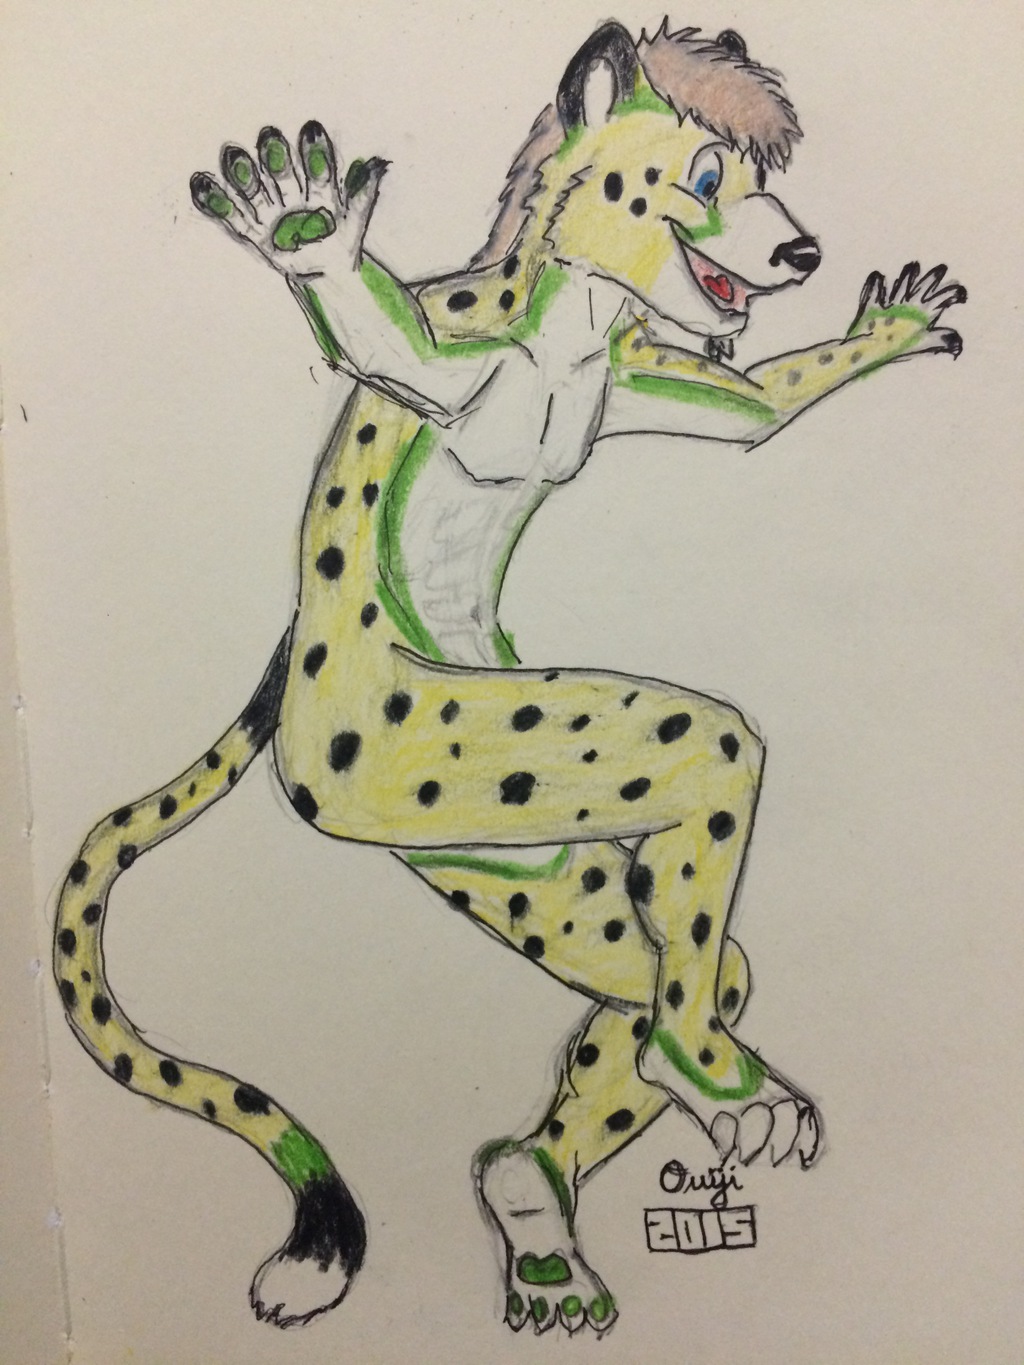 Most recent image: Sky Cheetah Pounce!